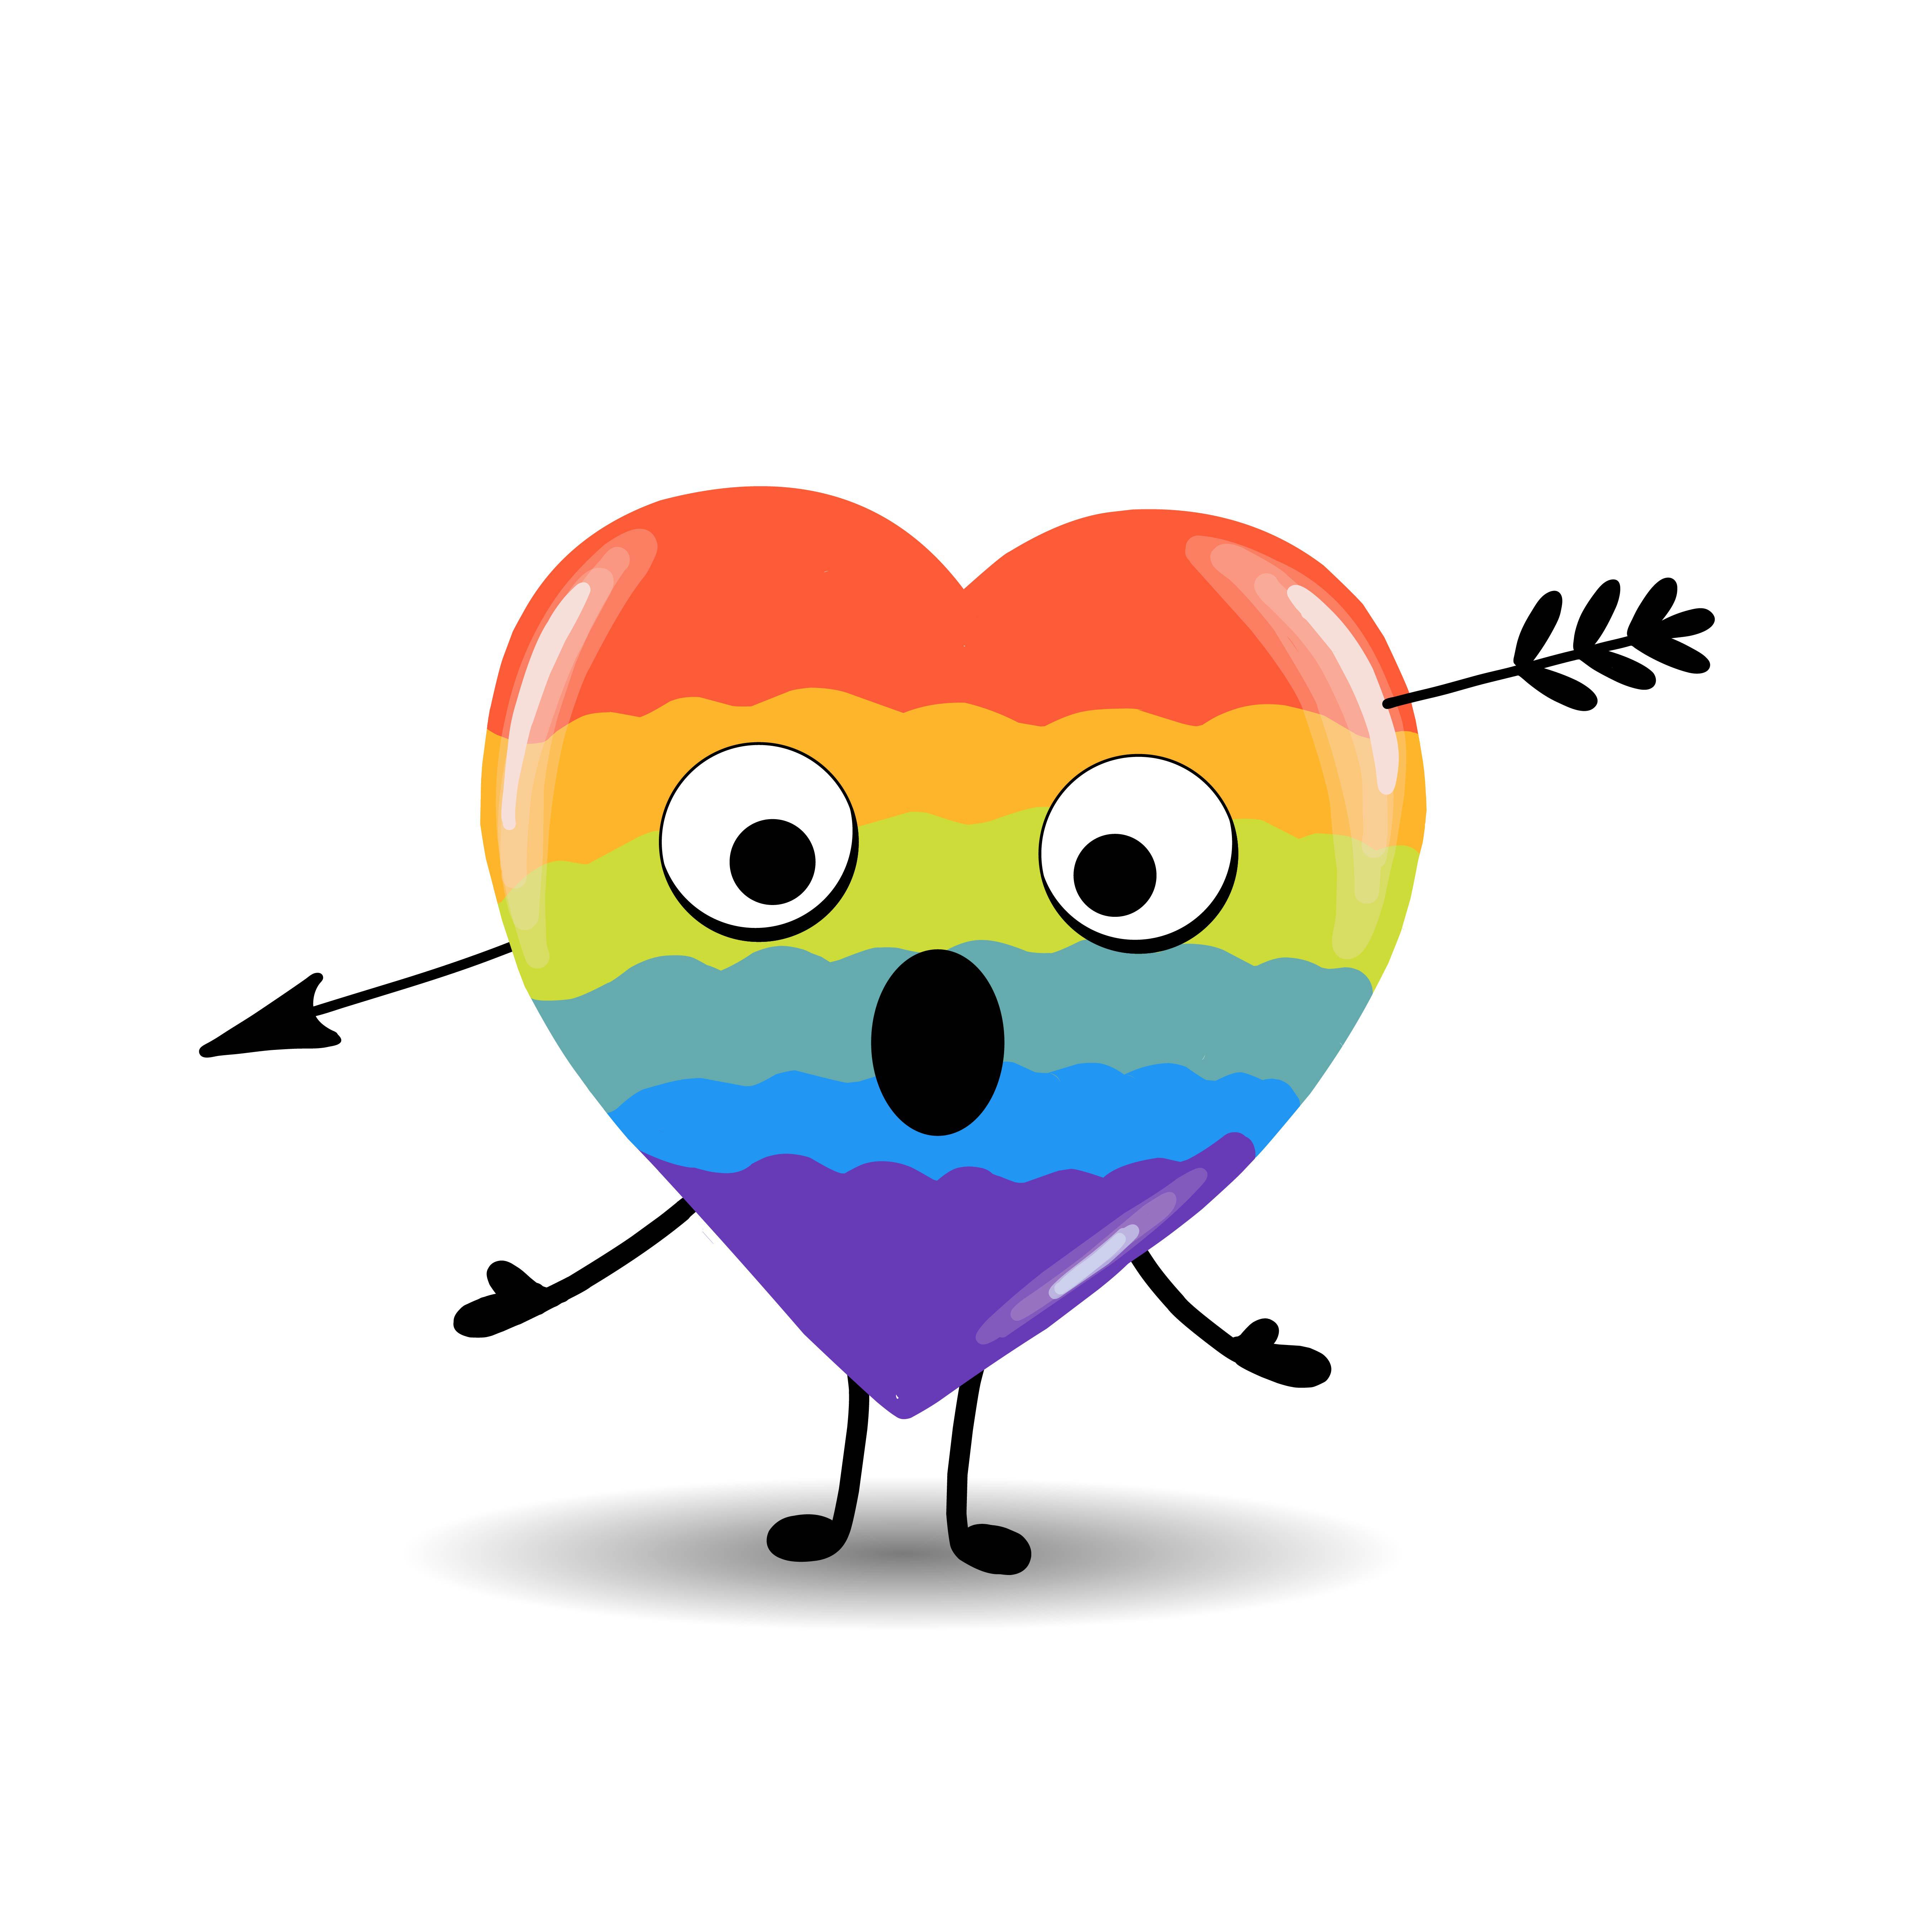 Gay Pride. LGBT concept. Cartoon vector colorful illustration. Valentine&rsquo;s Day. Rainbow heart. Lesbian-gay-bisexual-transgender. Rainbow love concept. Vector illustration. Gay Pride. LGBT concept. Cartoon vector colorful illustration. Valentine&rsquo;s Day. Rainbow heart. Lesbian-gay-bisexual-transgender. Rainbow love concept. Vector illustration.